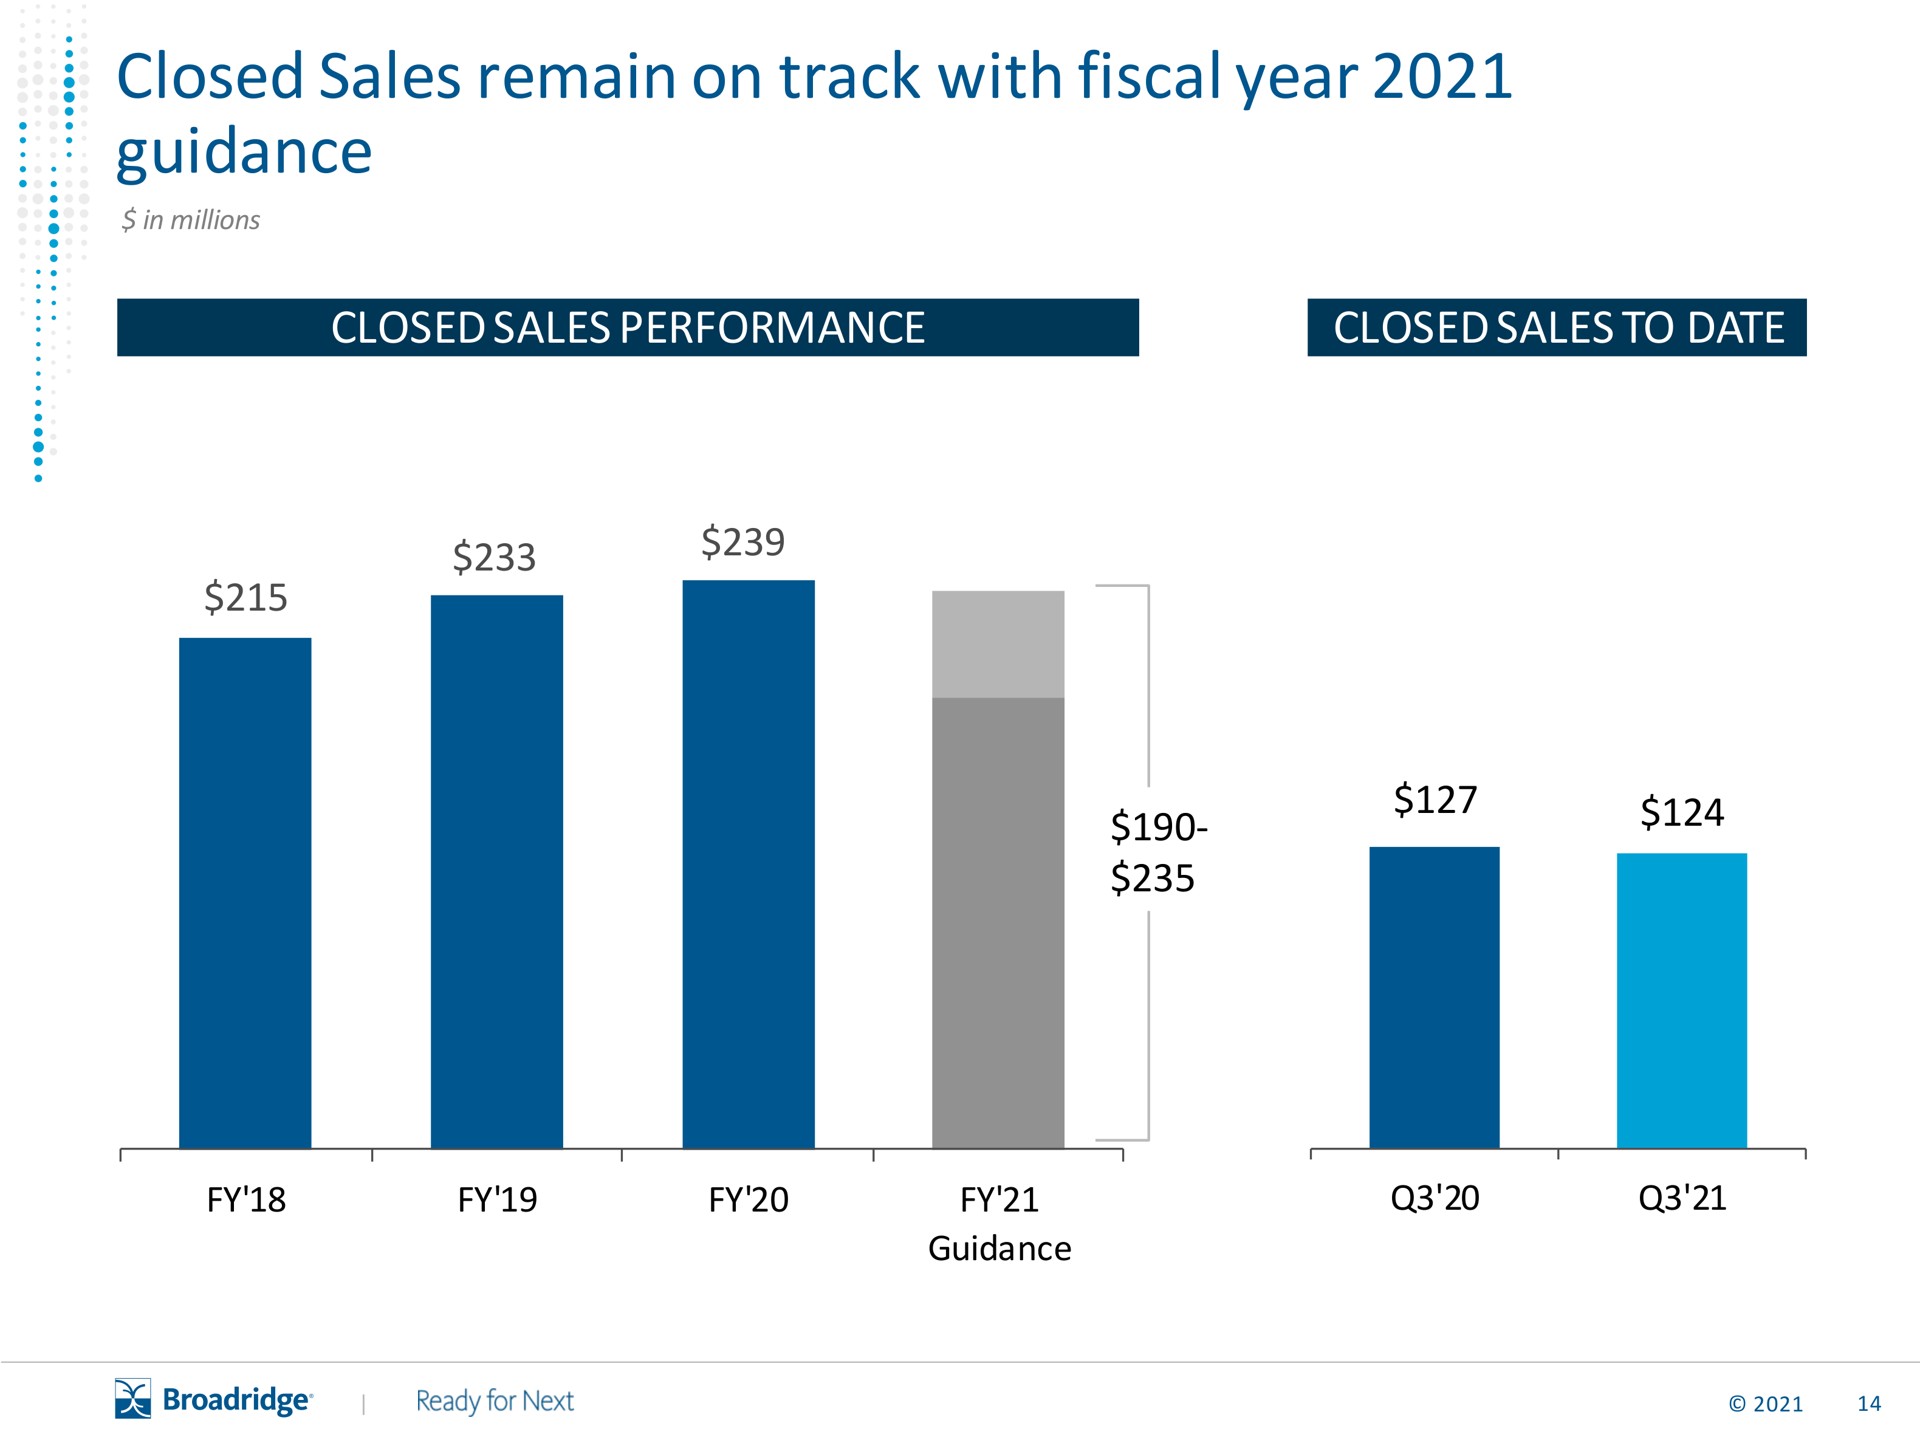 closed sales remain on track with fiscal year guidance performance vase | Broadridge Financial Solutions